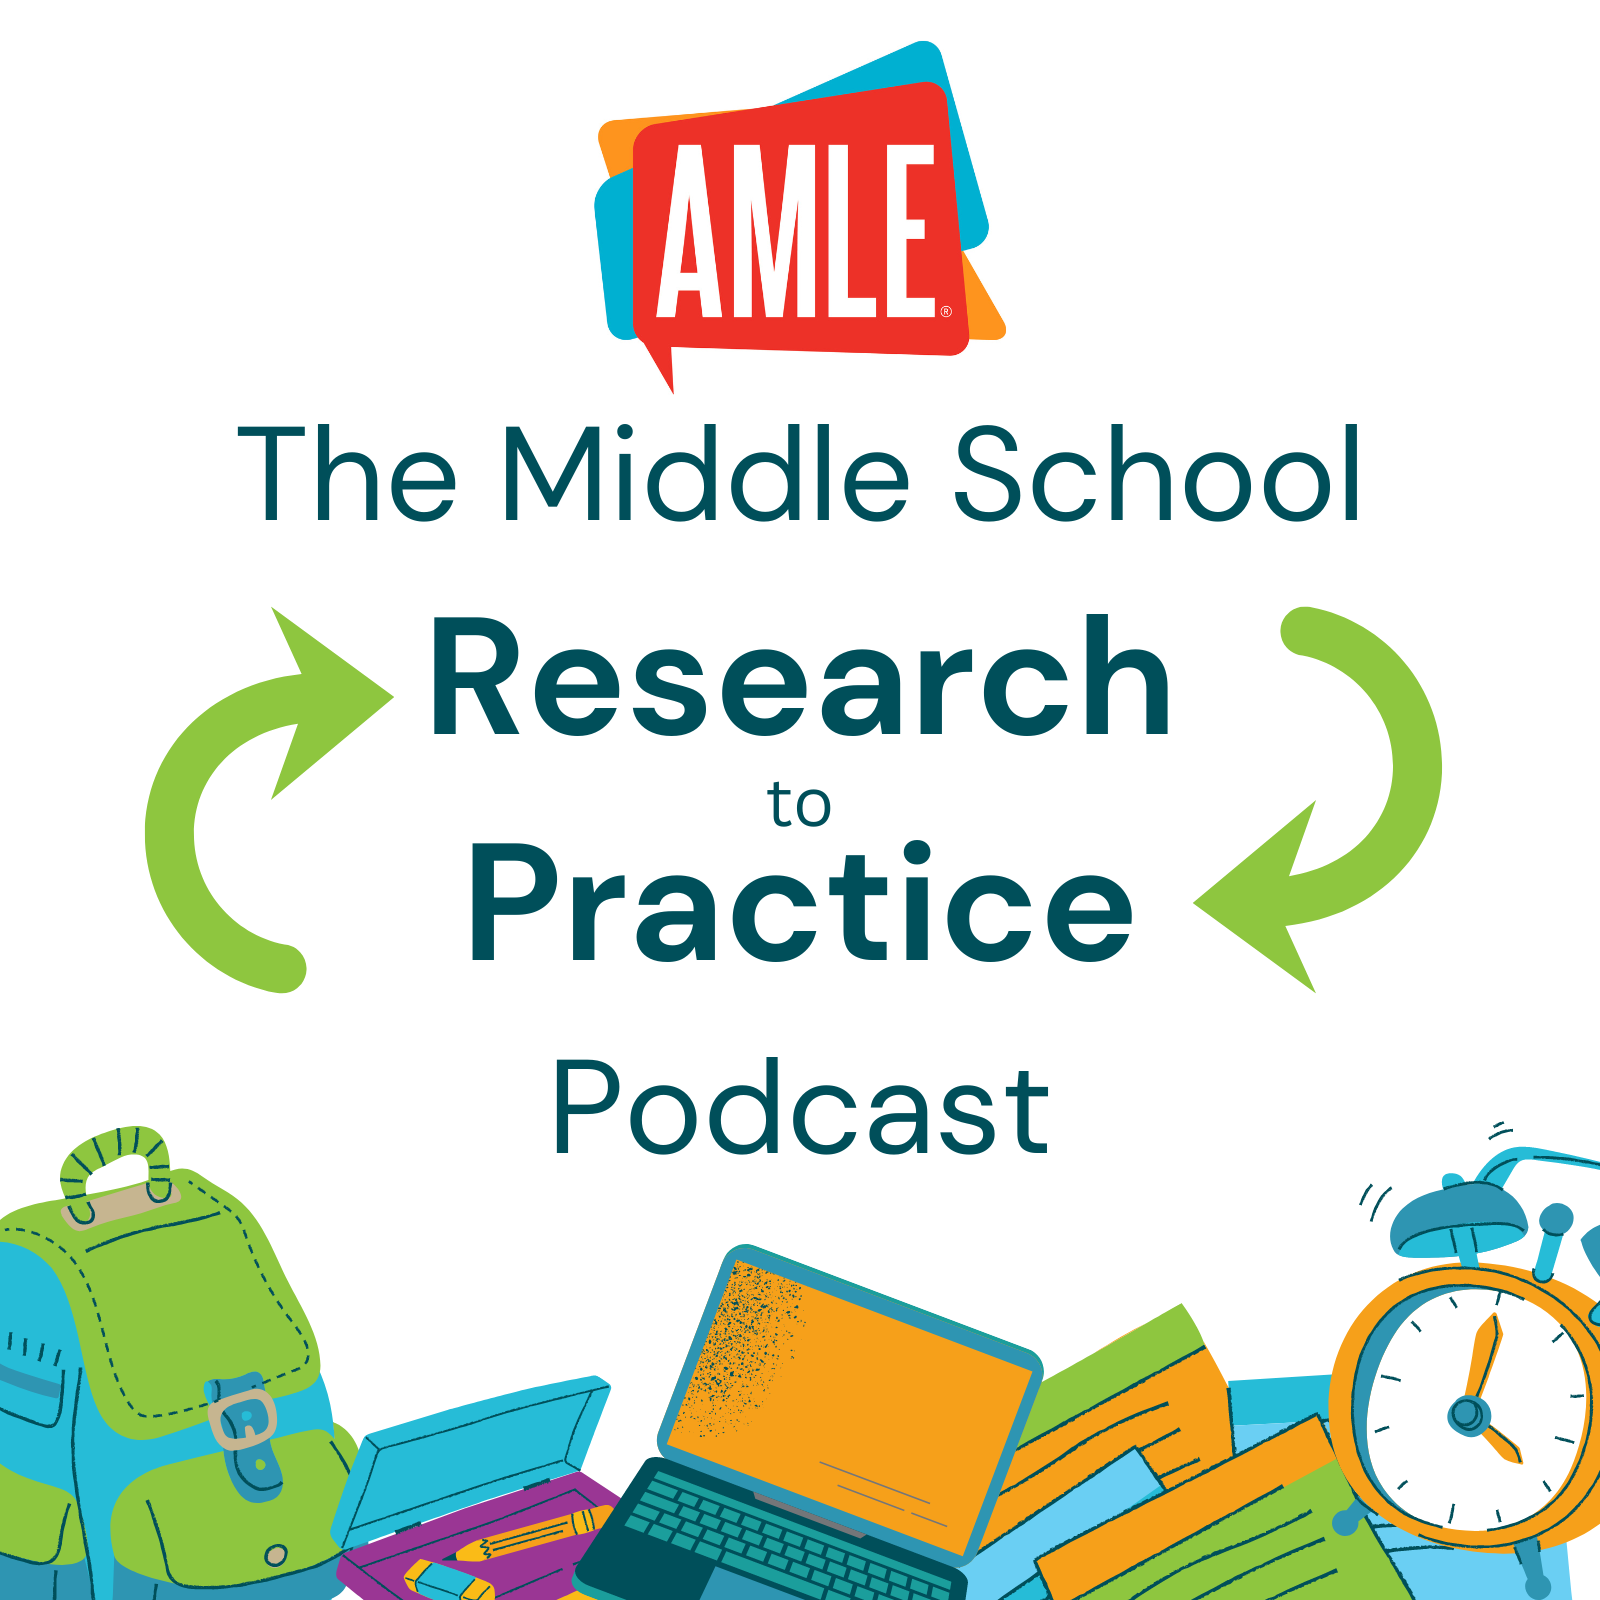 AMLE Research to Practice Podcast Logo